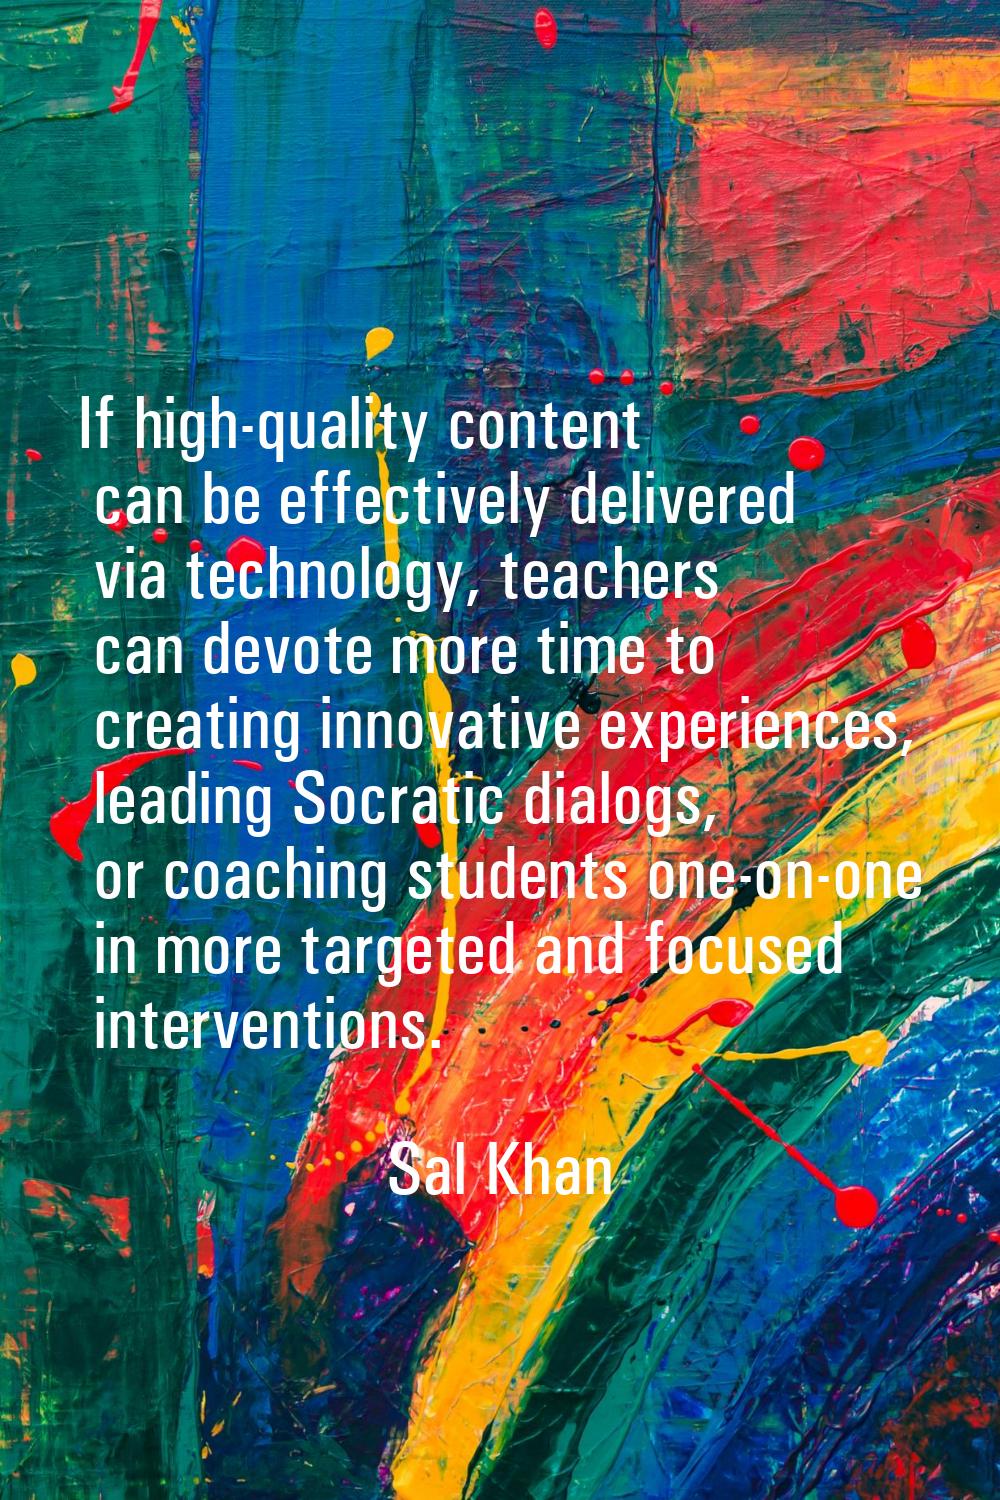 If high-quality content can be effectively delivered via technology, teachers can devote more time 